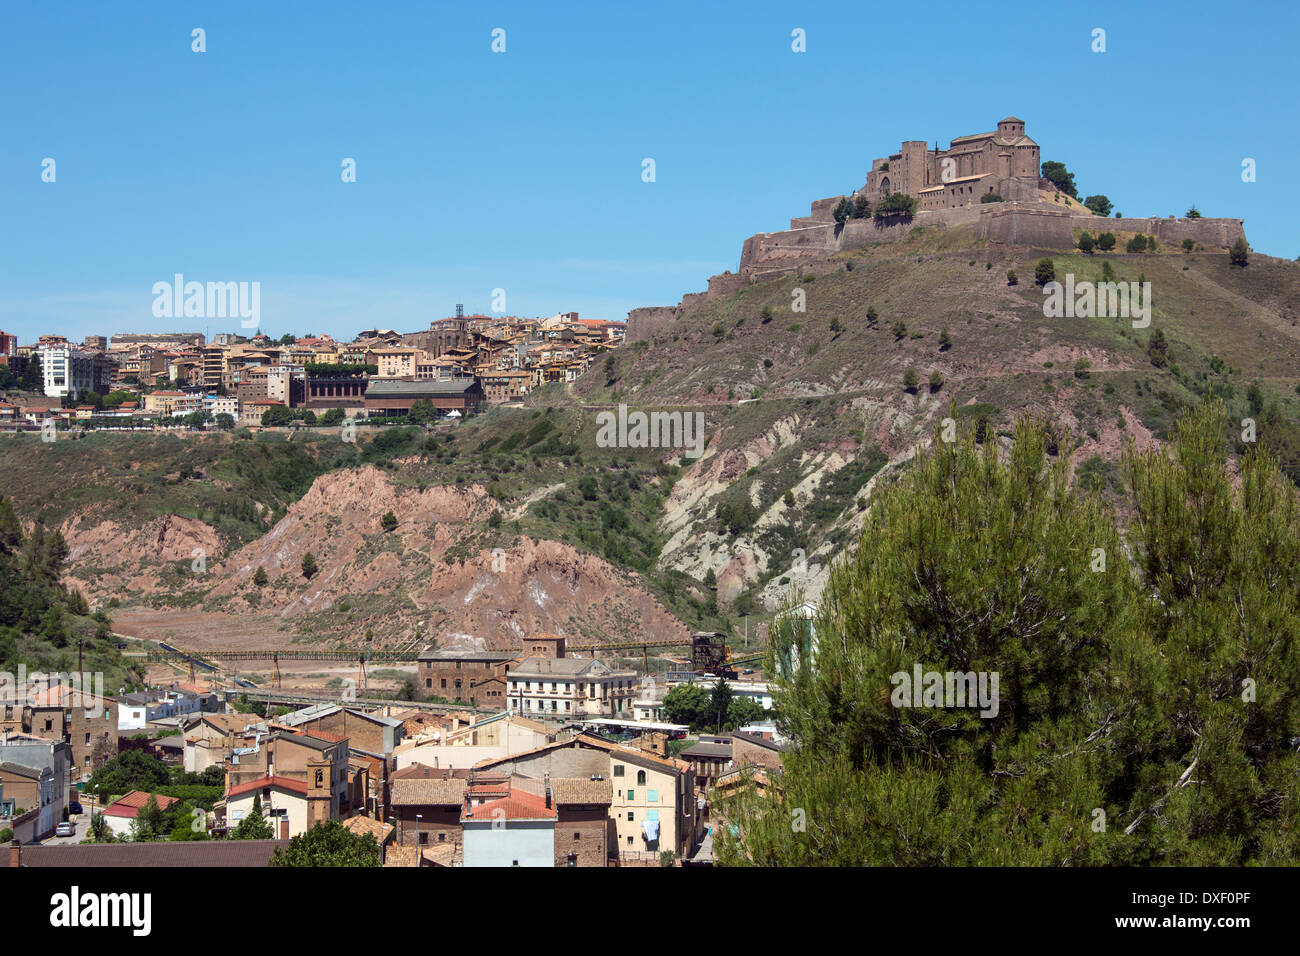 Cardona Castle and Abbey high above the industrial town of Cardona in the Catalonia region of Spain. Stock Photo